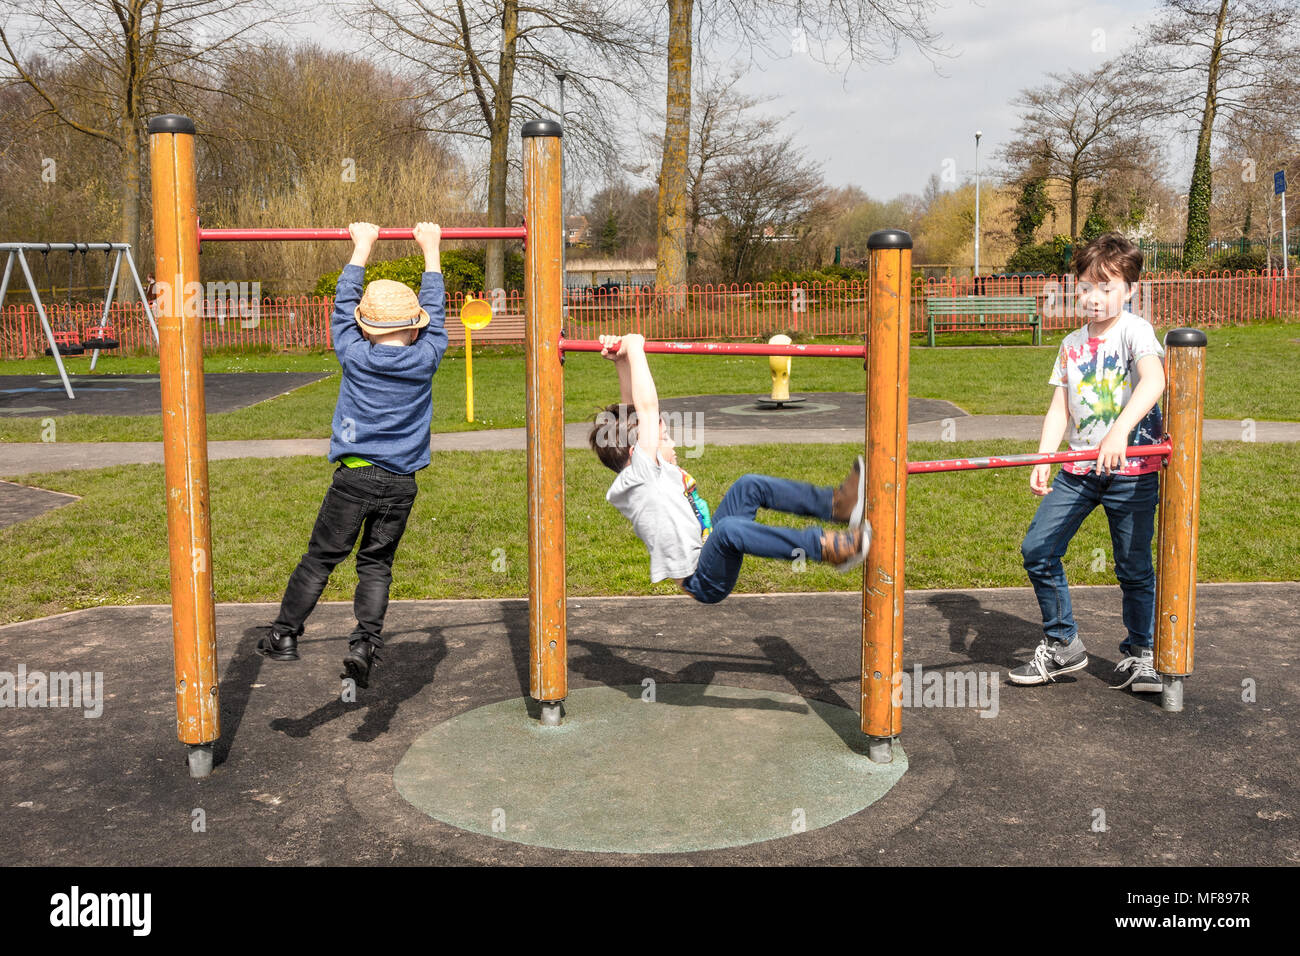 Young children play on pull up bars in a children's playground at the center of the village of Perton near Wolverhampton. Stock Photo